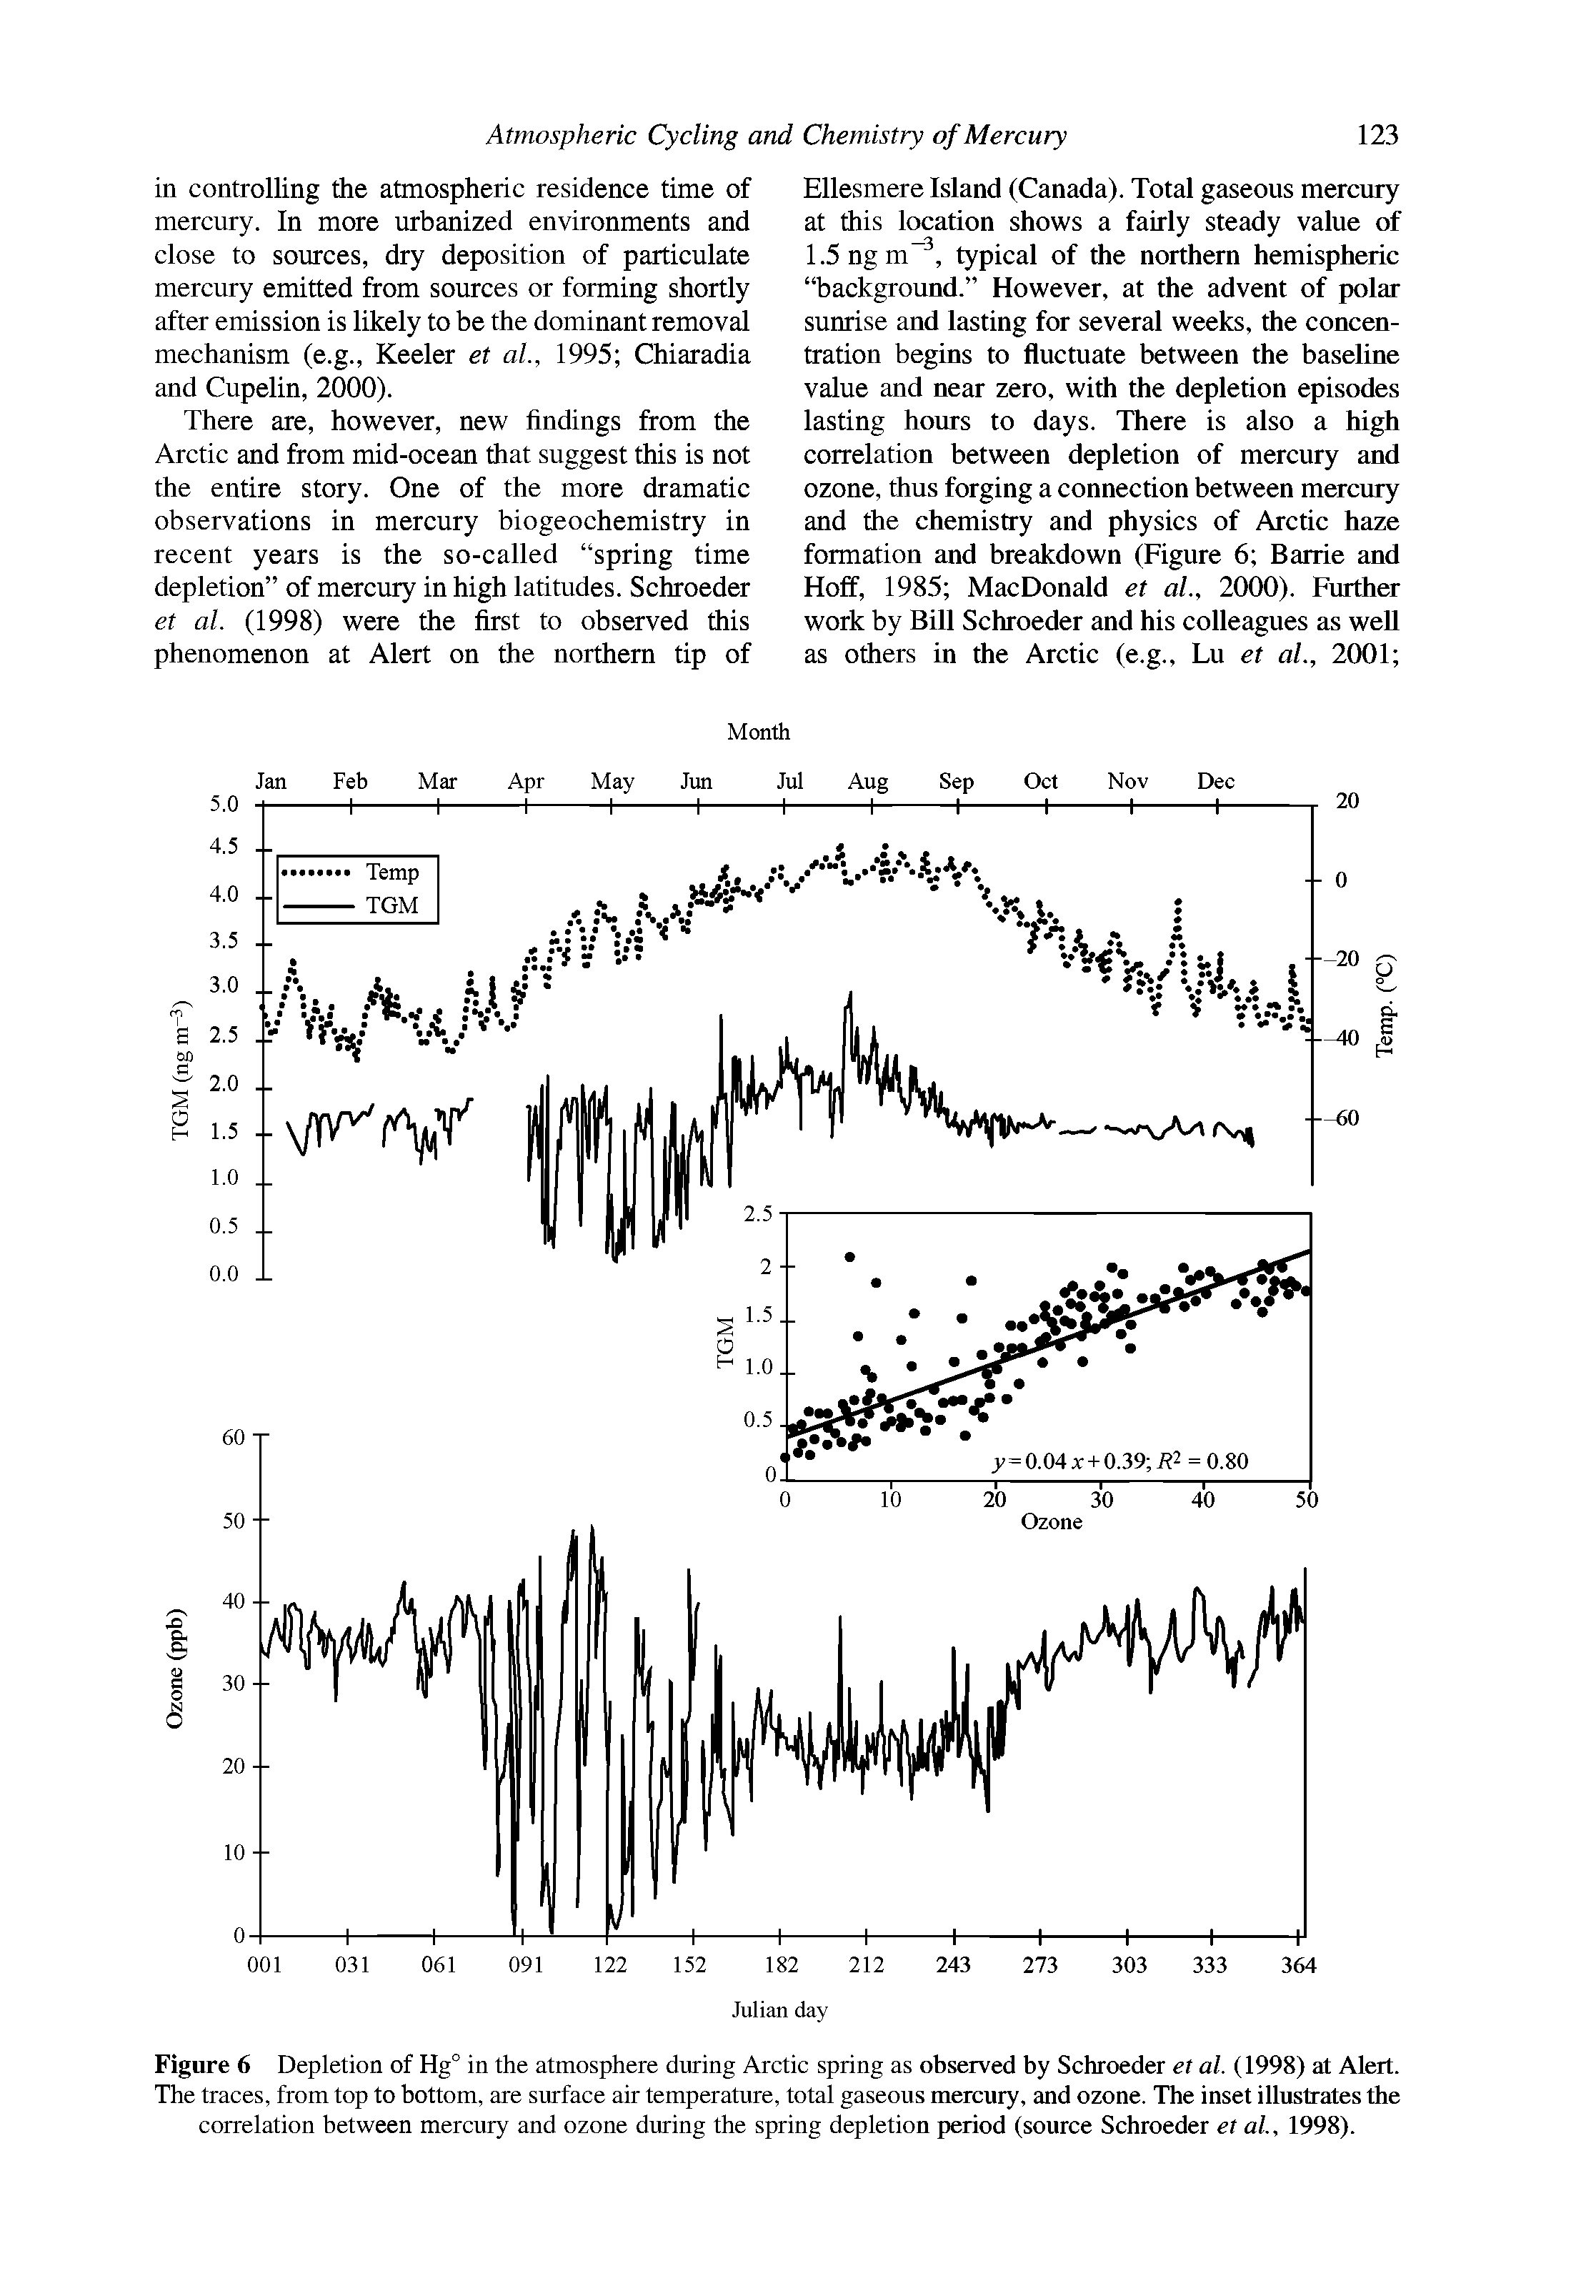 Figure 6 Depletion of Hg° in the atmosphere during Arctic spring as observed by Schroeder et al. (1998) at Alert. The traces, from top to bottom, are surface air temperature, total gaseous mercury, and ozone. The inset illustrates the correlation between mercury and ozone during the spring depletion period (source Schroeder et al, 1998).